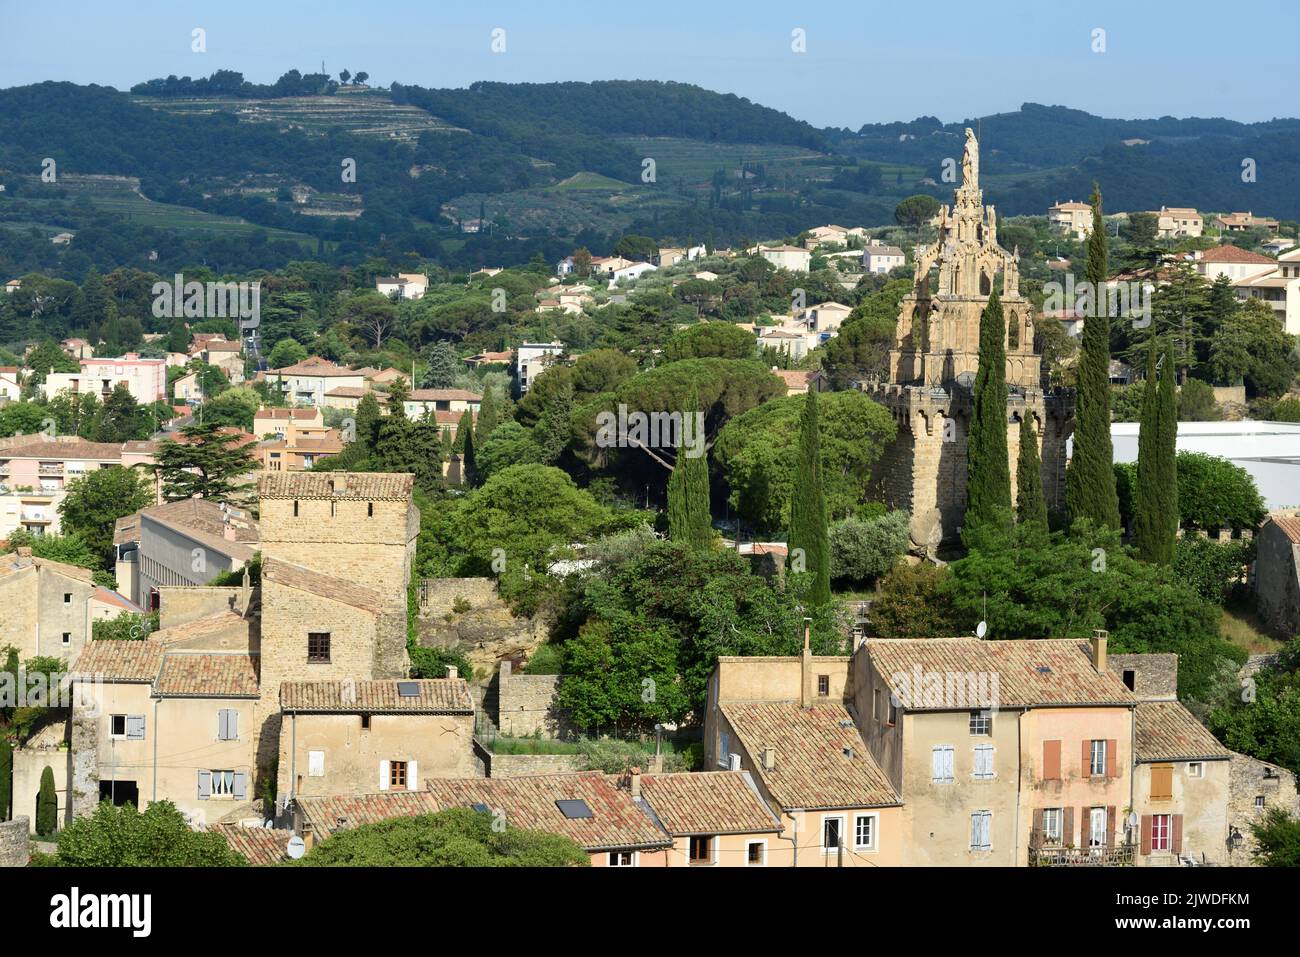 View over the Old Town of Nyons with the Medieval Stone Tower, Tour Randonne & Gothic Chapel of Notre-Dame-de-Bon-Secours Nyons Drôme Provence France Stock Photo